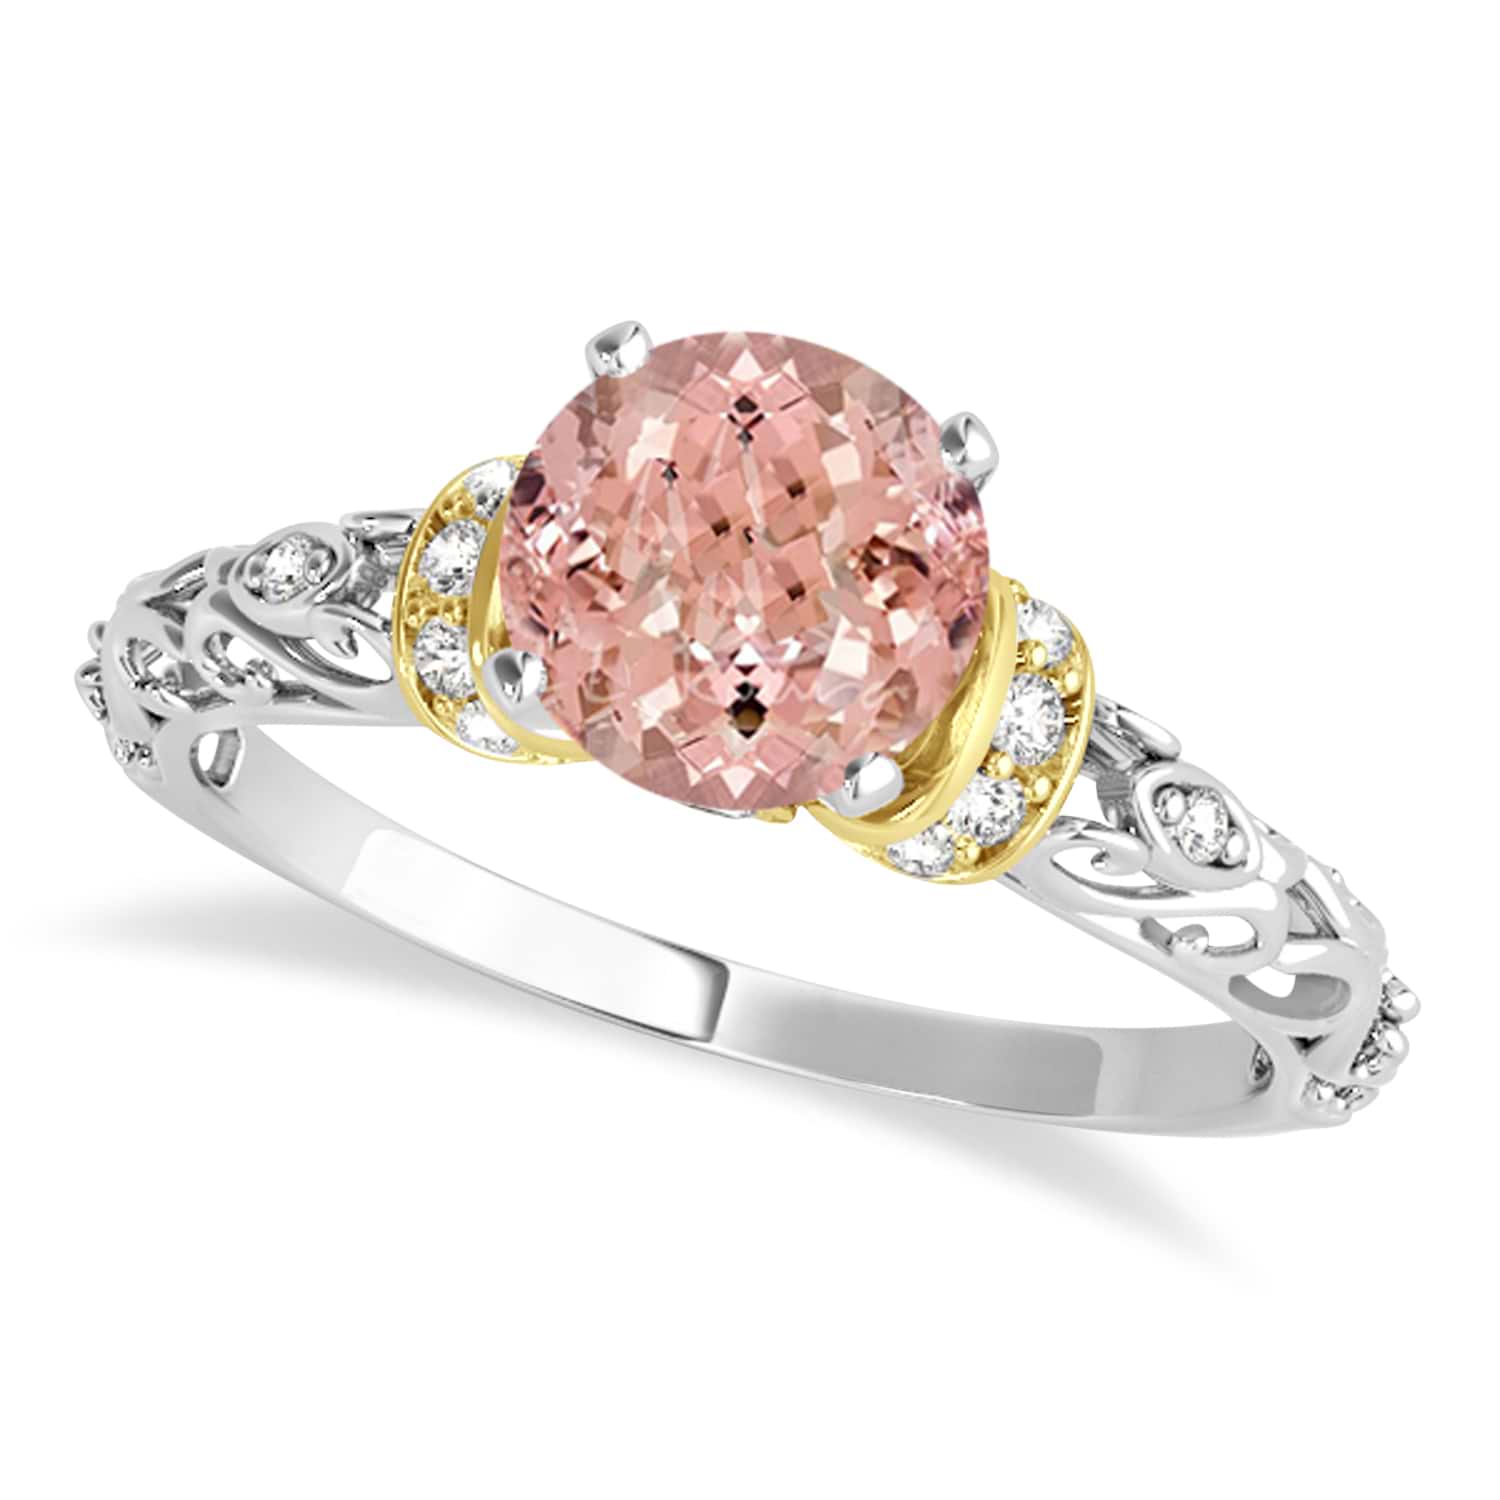 Morganite & Diamond Antique Style Engagement Ring 18k Two-Tone Gold (1.62ct)